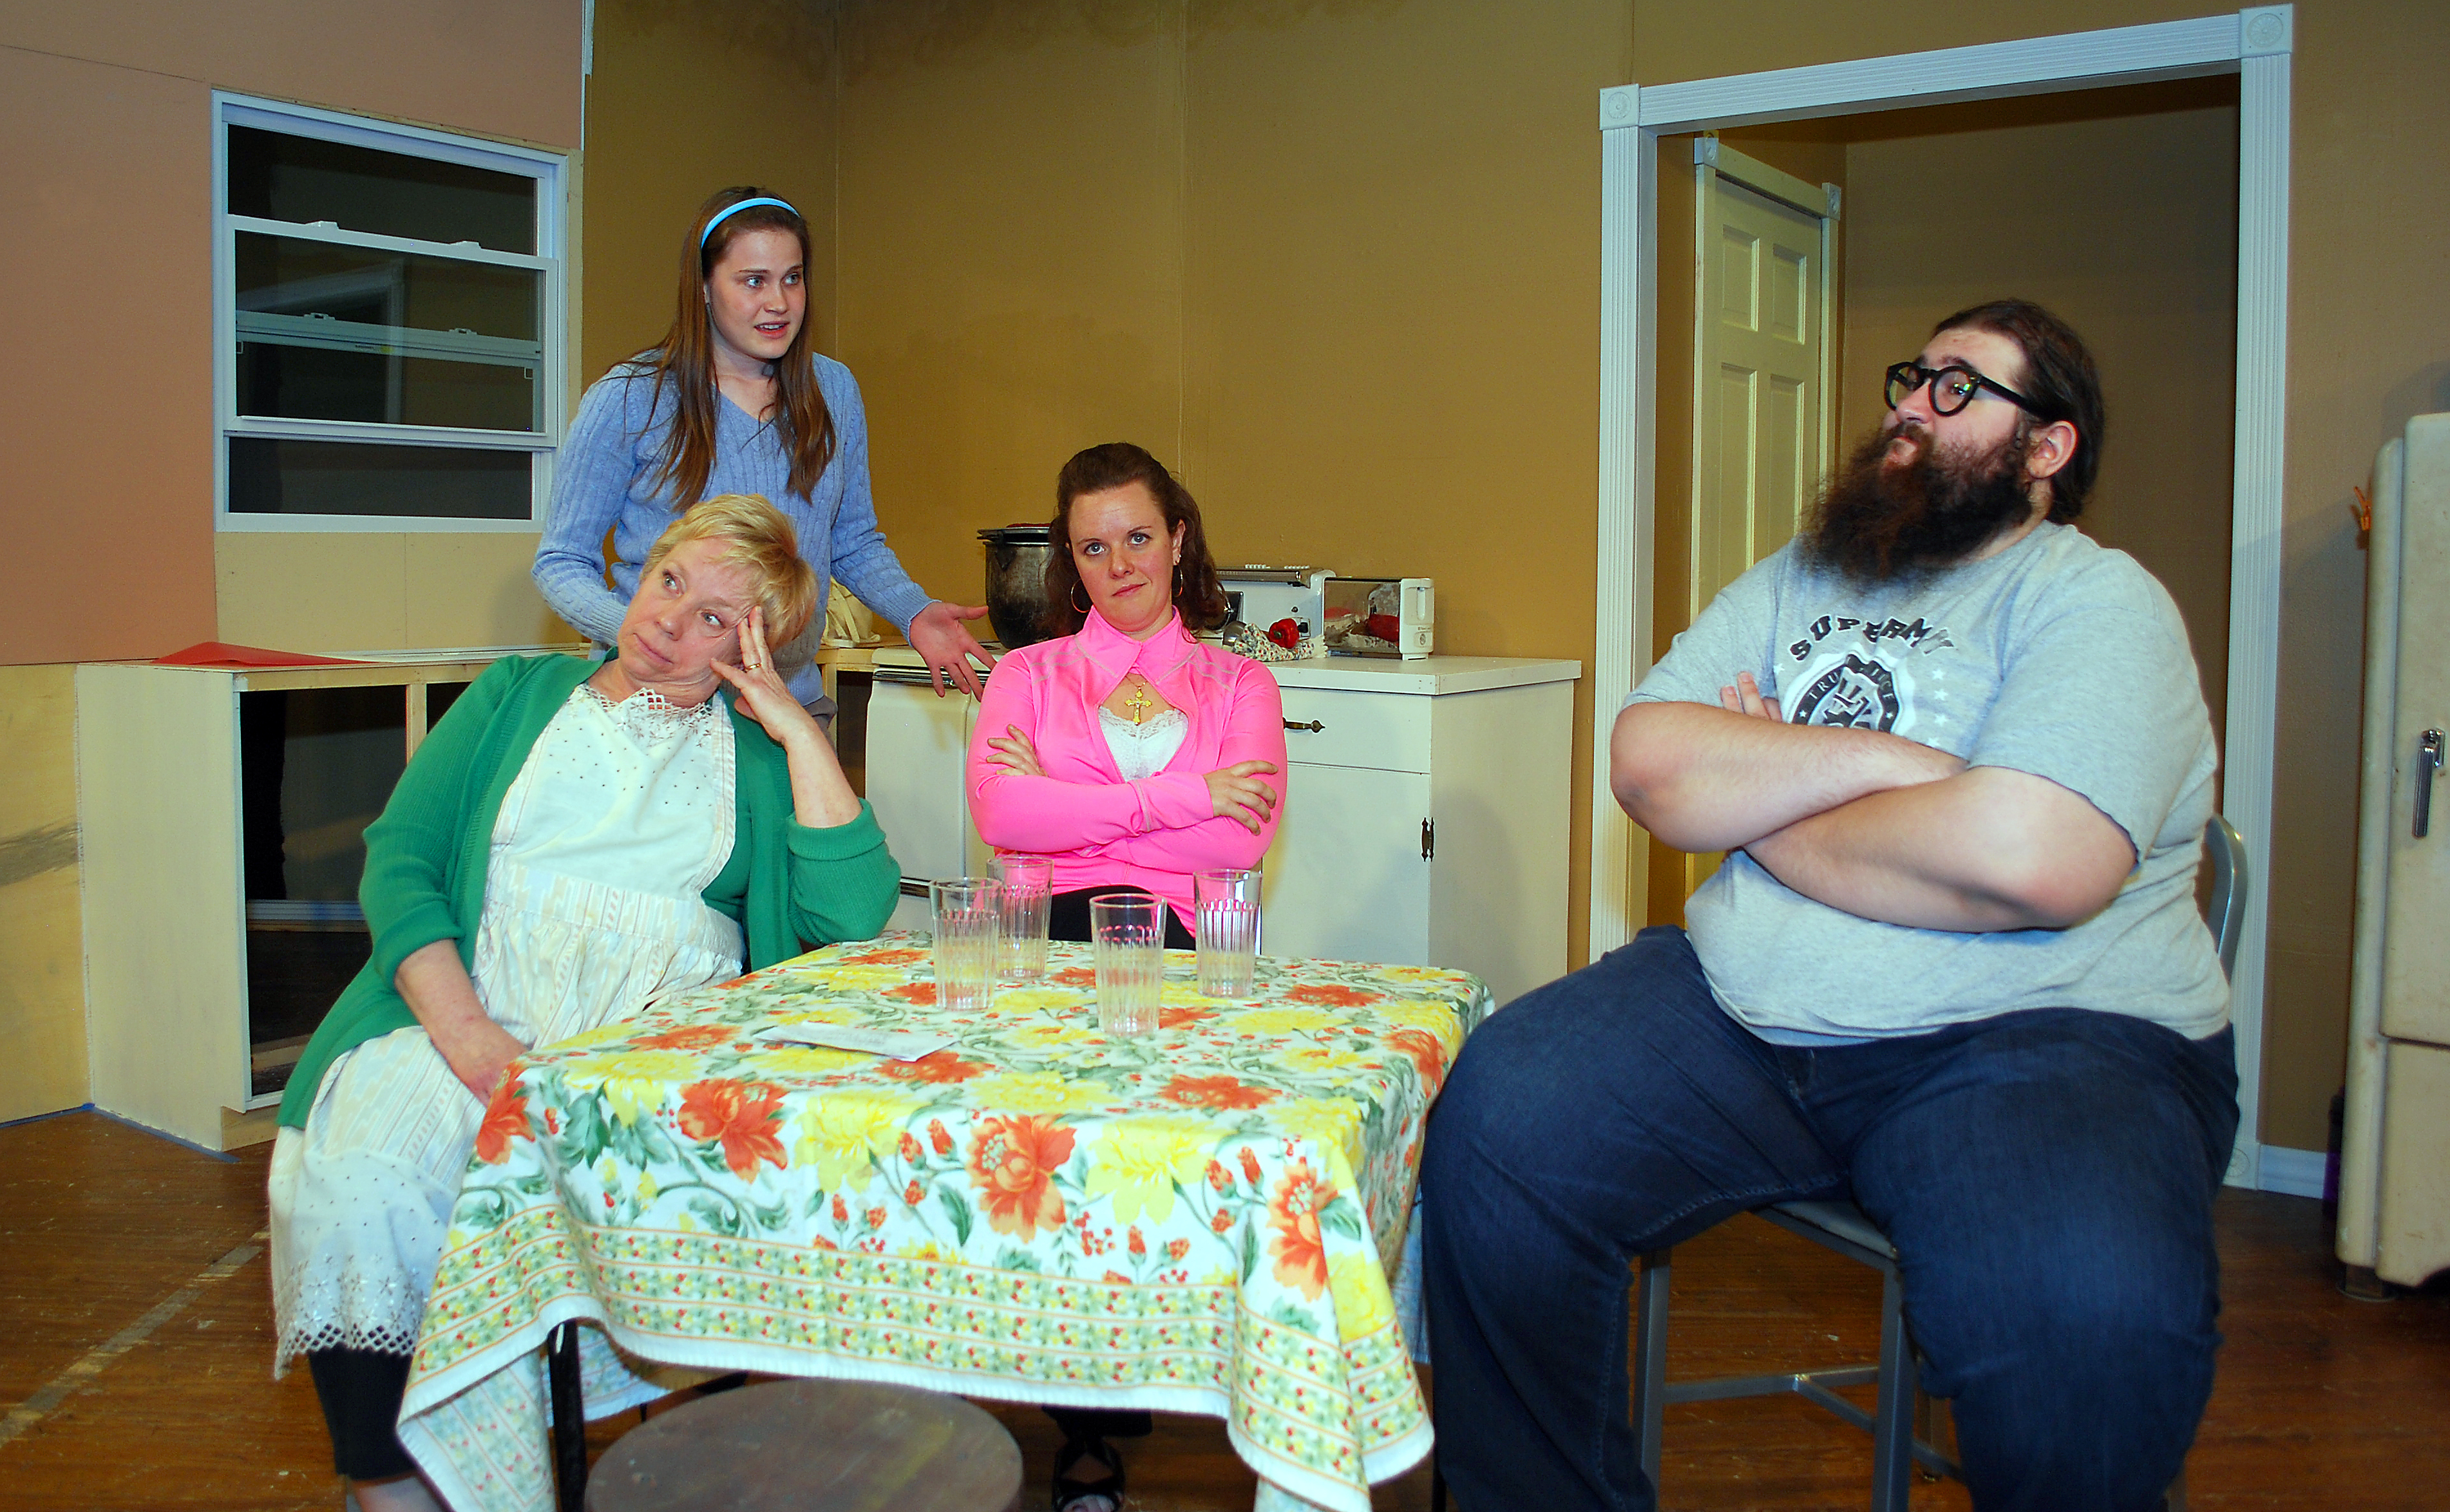 From left: Diann Ryan (Clara), Becca Wenning (Ruth), Kelly BeDell (Beverly) and Stefan U.G. LeBlanc (Jimmy) play the dysfunctional but loving Nowak family in “Miracle on South Division Street.” For more photos of the play, visit youarecurrent.com. (Photo by Robert Herrington)